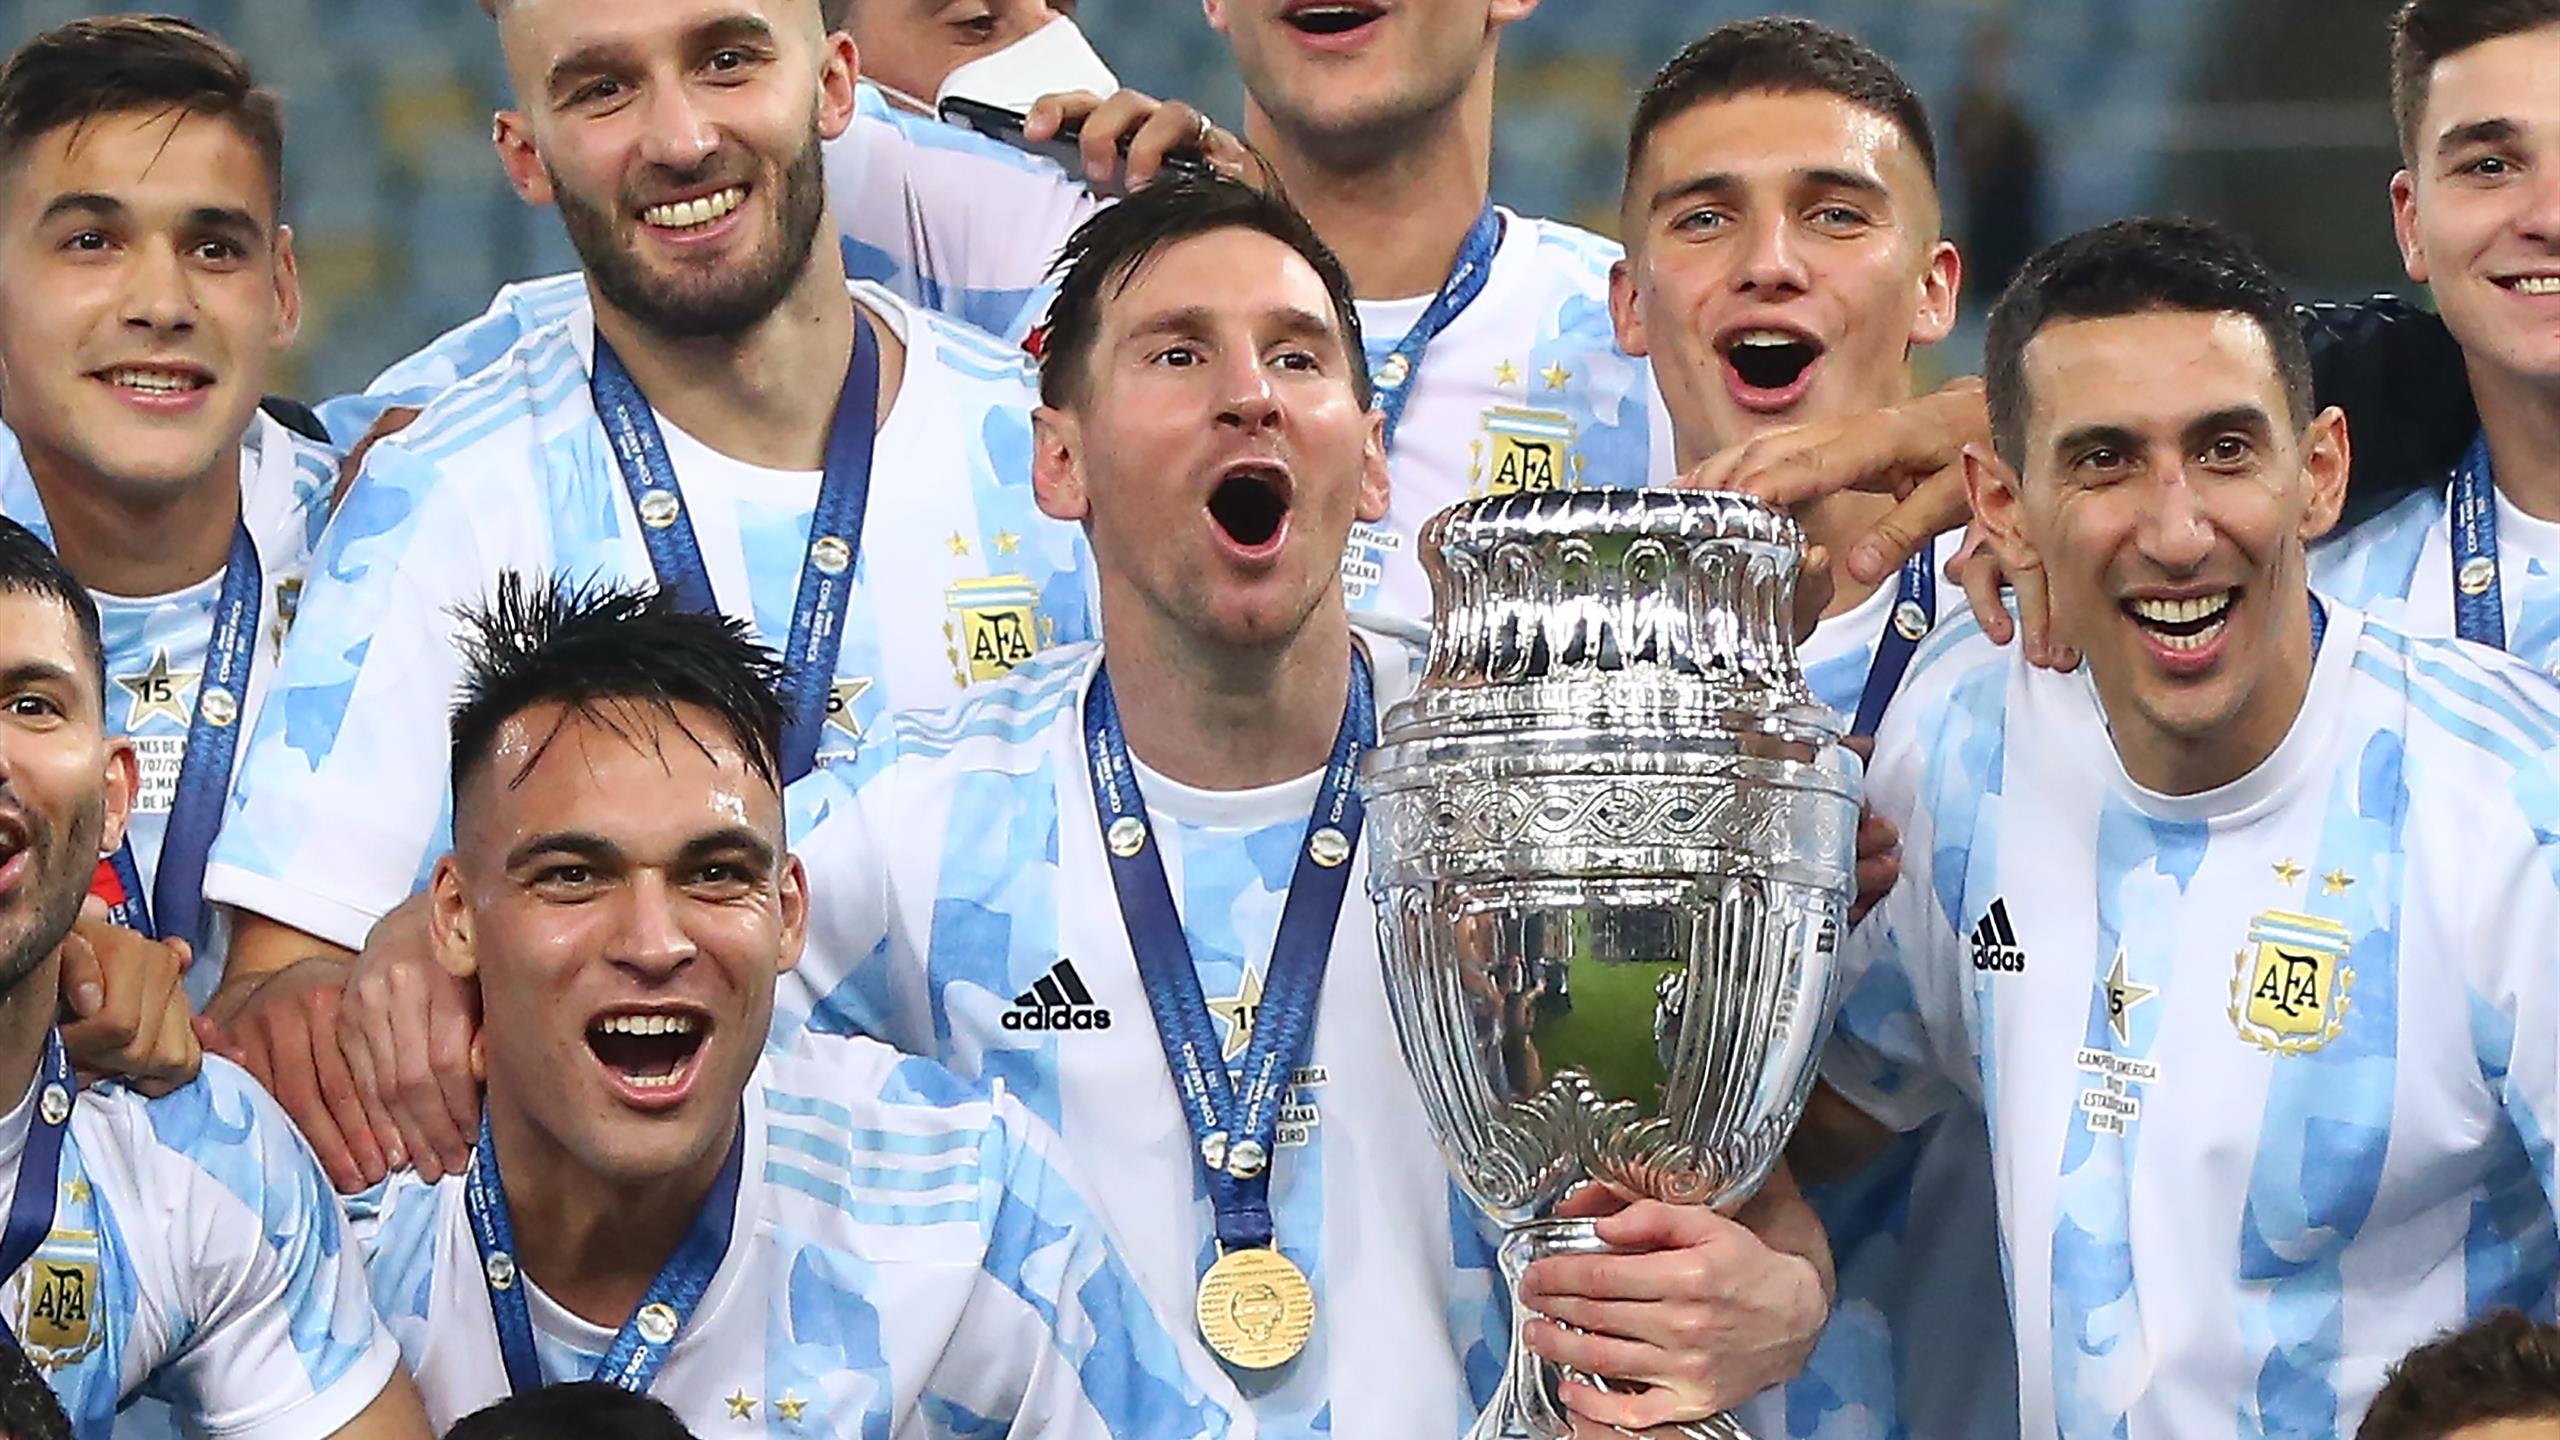 /copa-america-is-held-once-every-few-years-ole-sport-tv